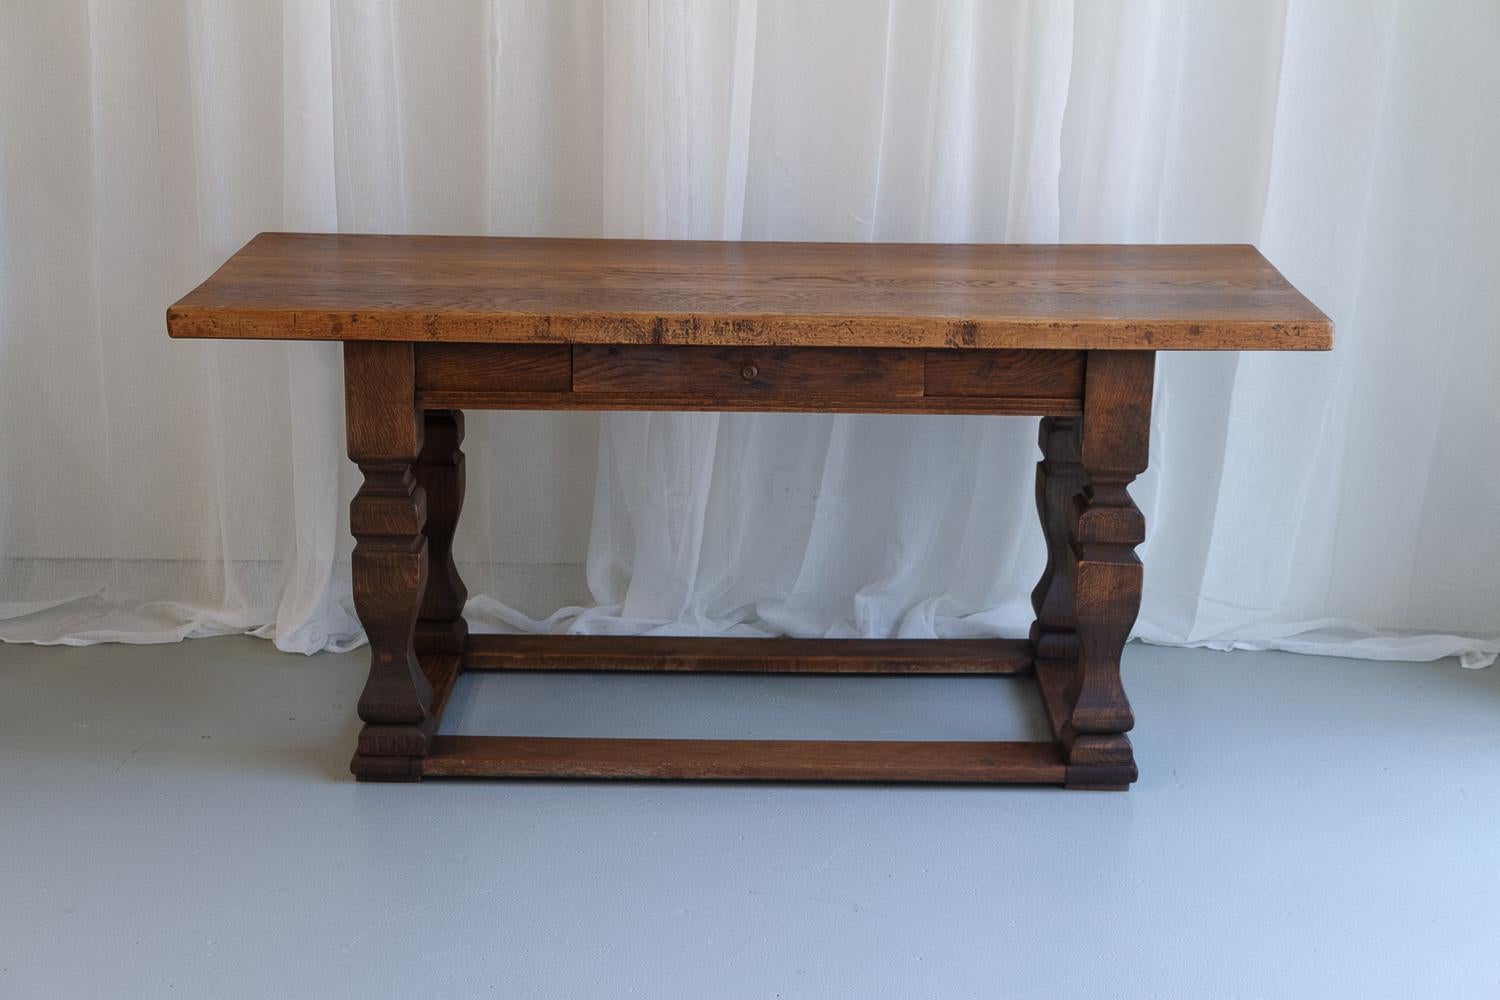 Vintage Oak Console Table.
Large console or kitchen table in solid stained oak with drawer. 
Wood has beautiful color and uniform patina.
